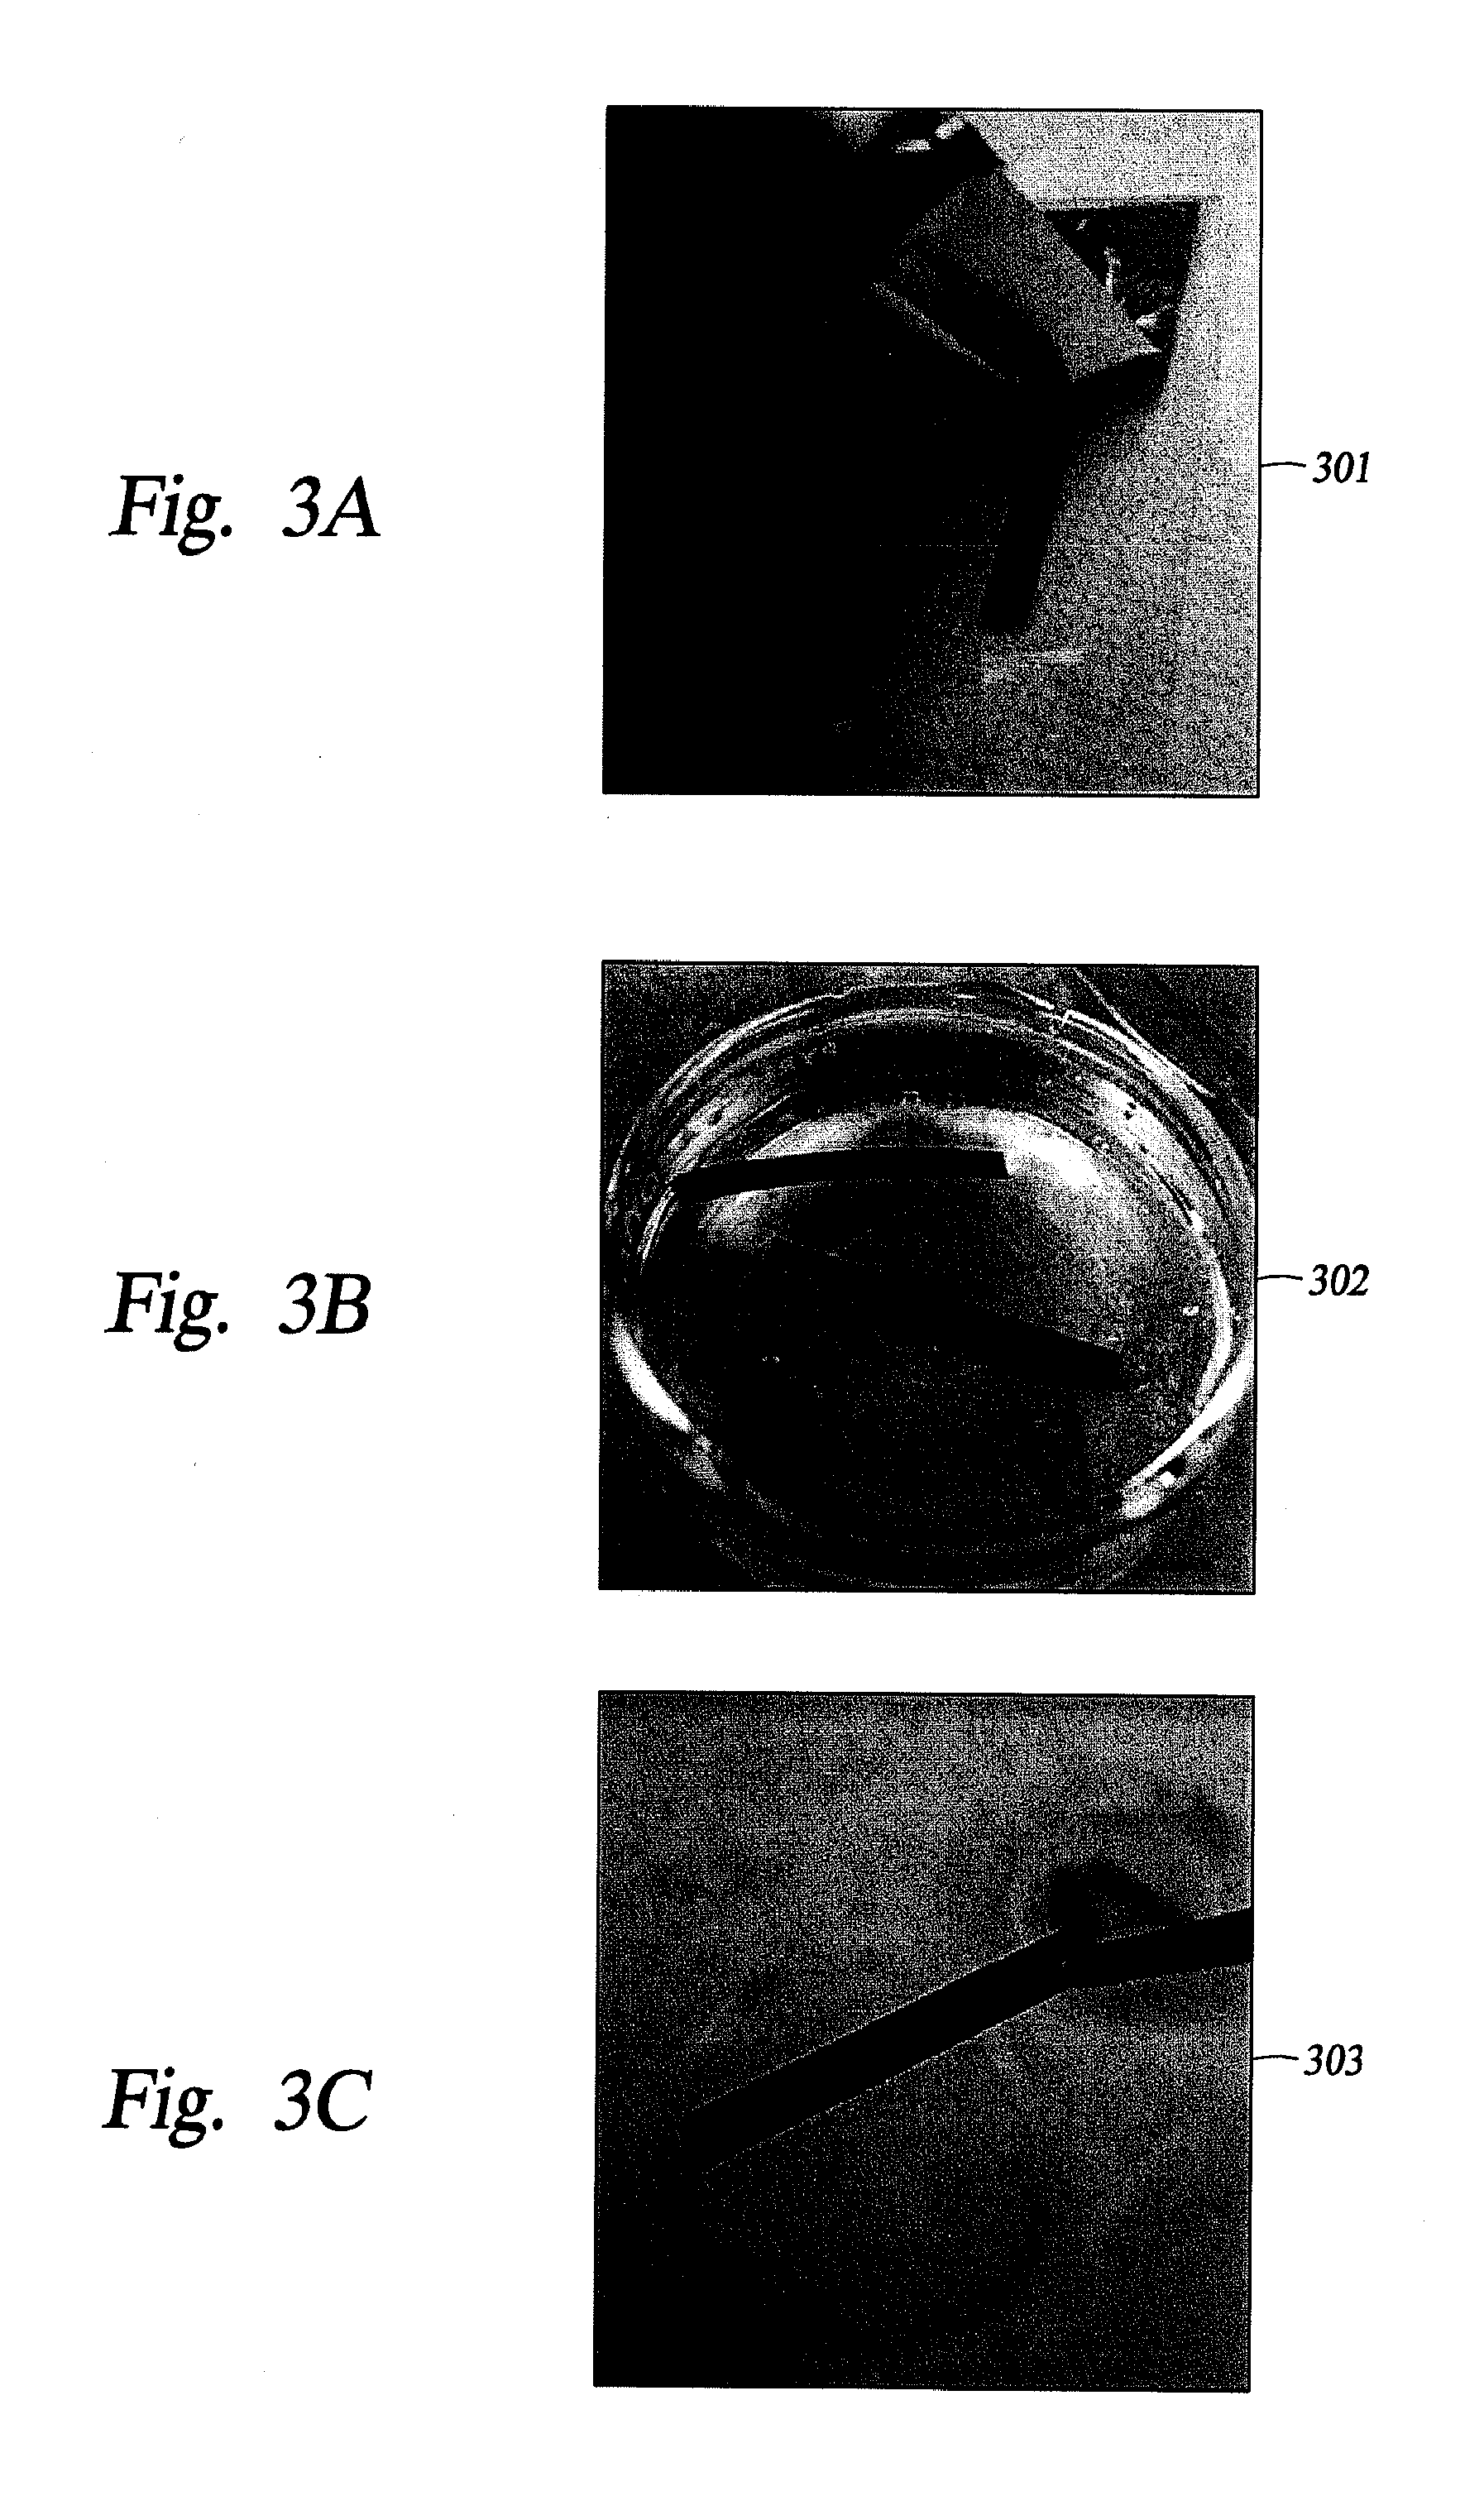 Method for Producing Aligned Near Full Density Pure Carbon Nanotube Sheets, Ribbons, and Films From Aligned Arrays of as Grown Carbon Nanotube Carpets/Forests and Direct Transfer to Metal and Polymer Surfaces